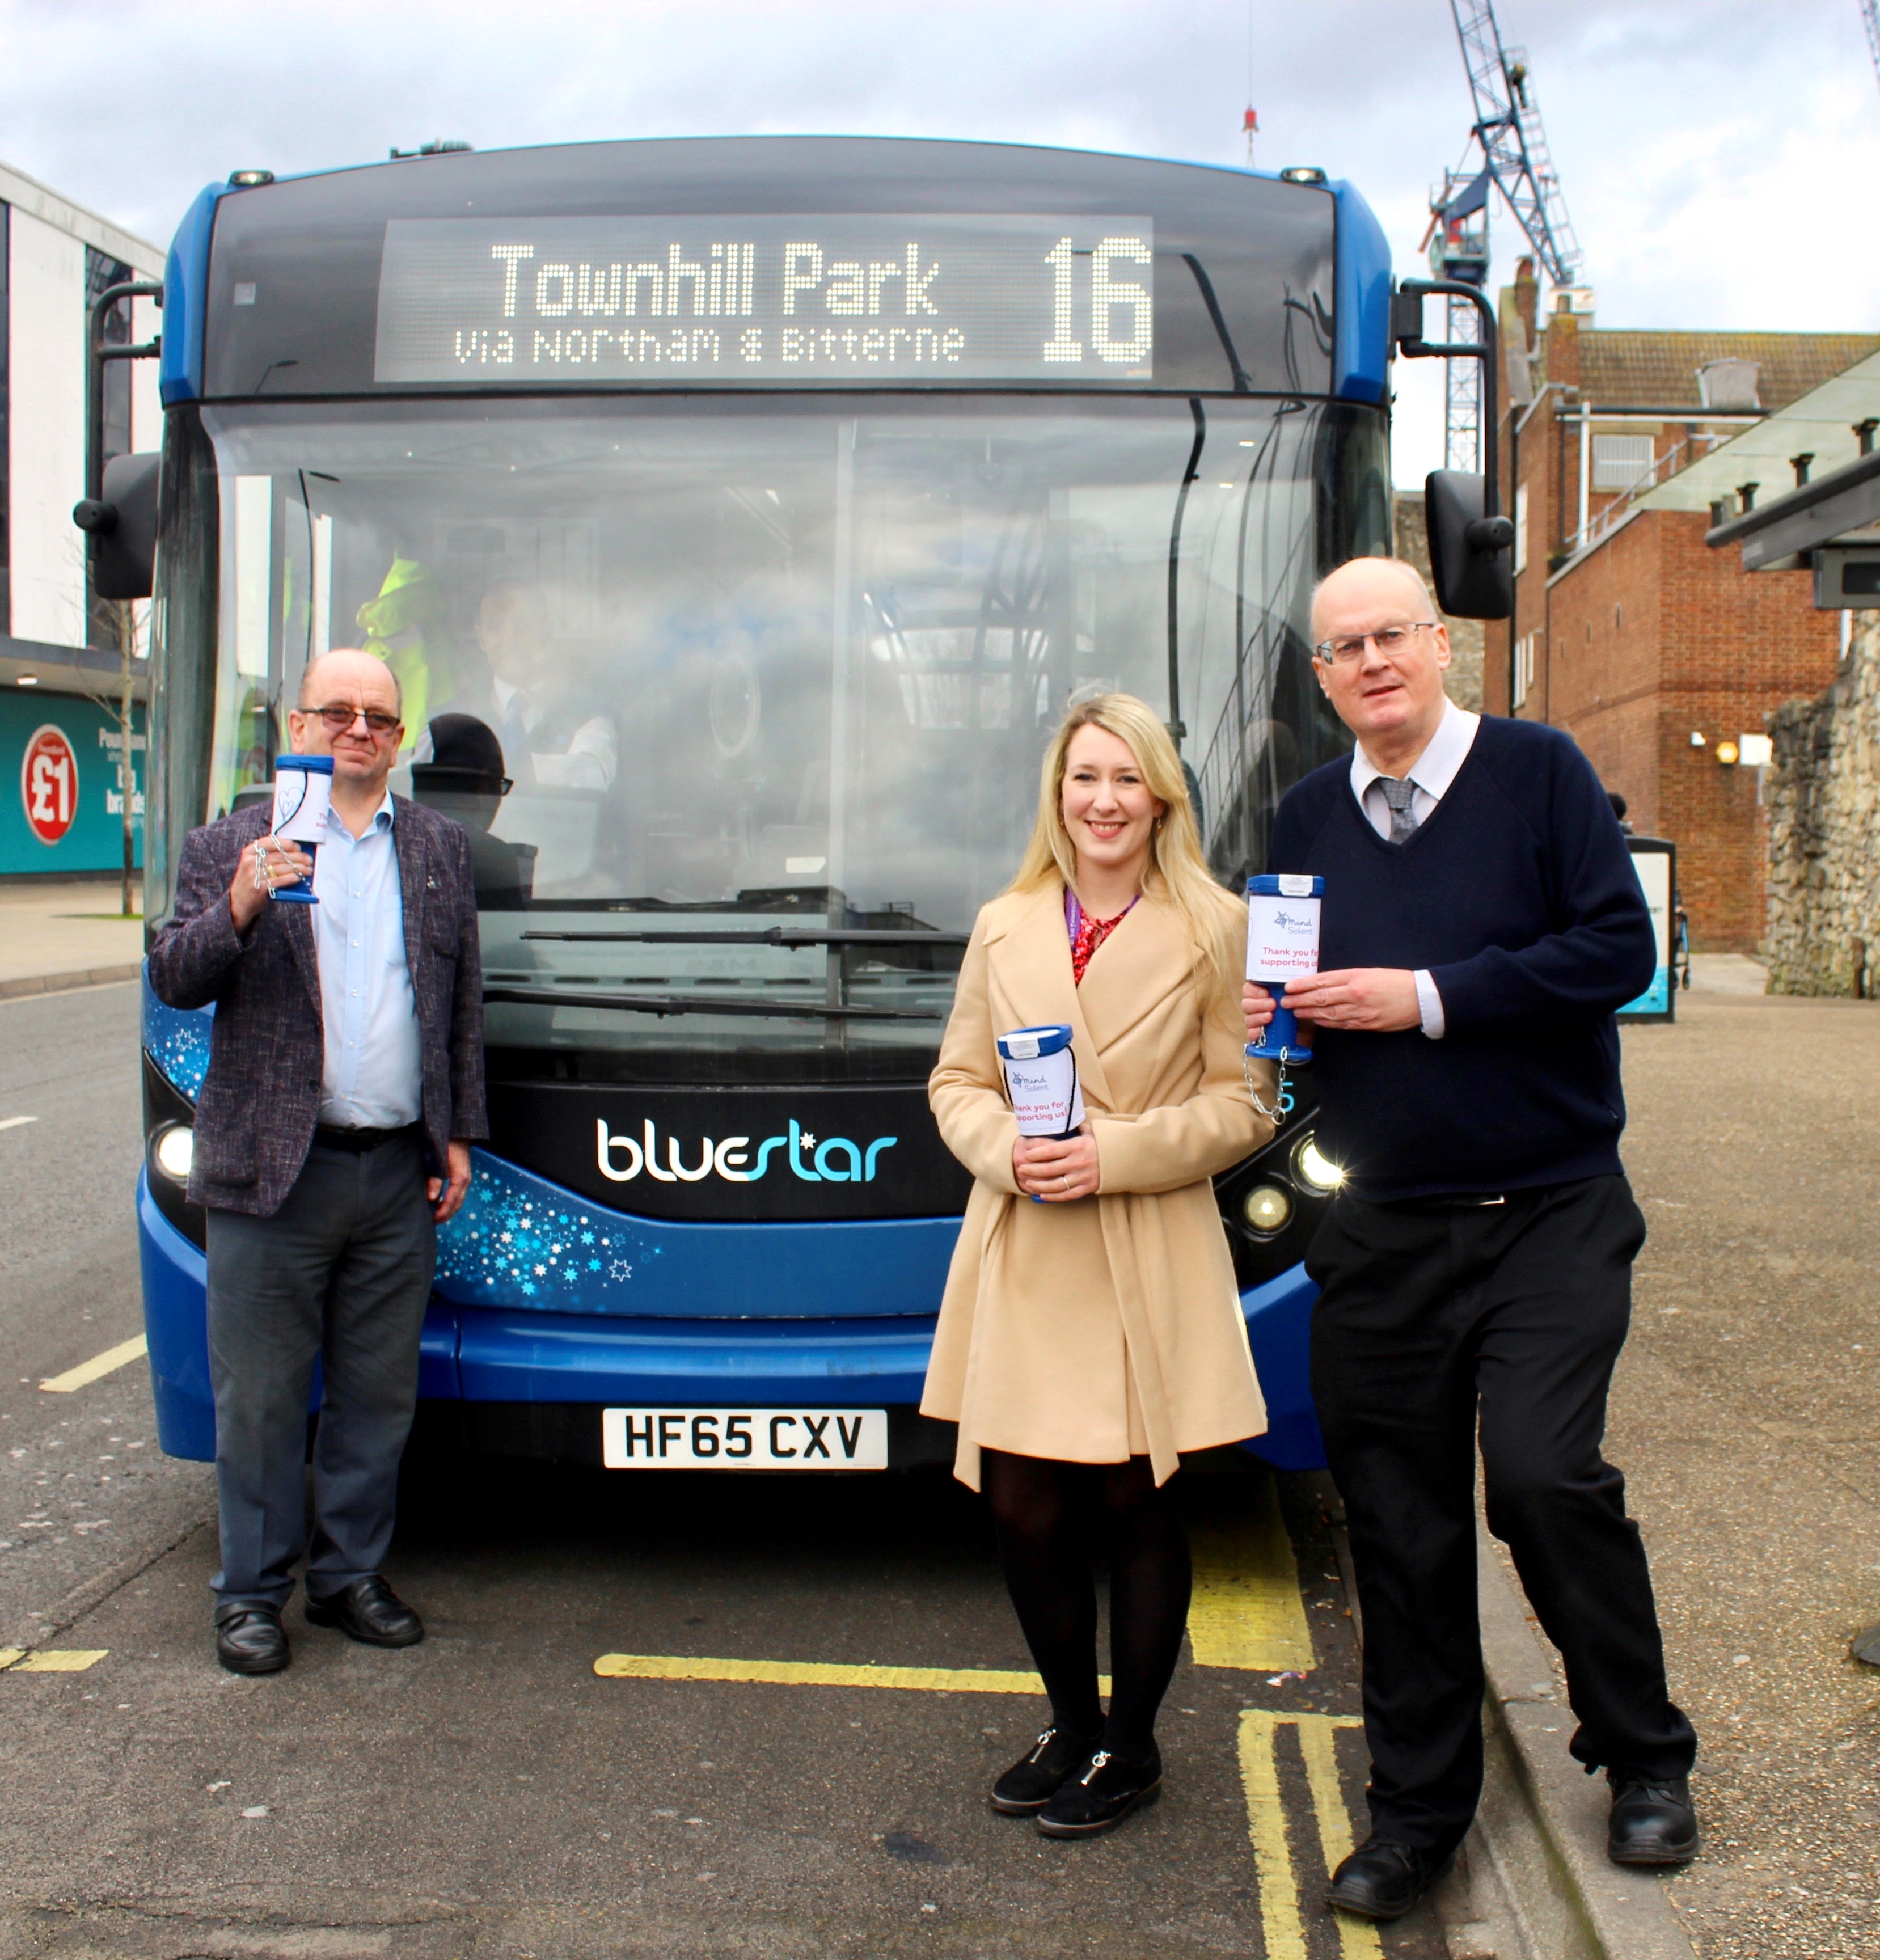 Bluestar representatives in front of a Bluestar bus with a lady from Solent Mind